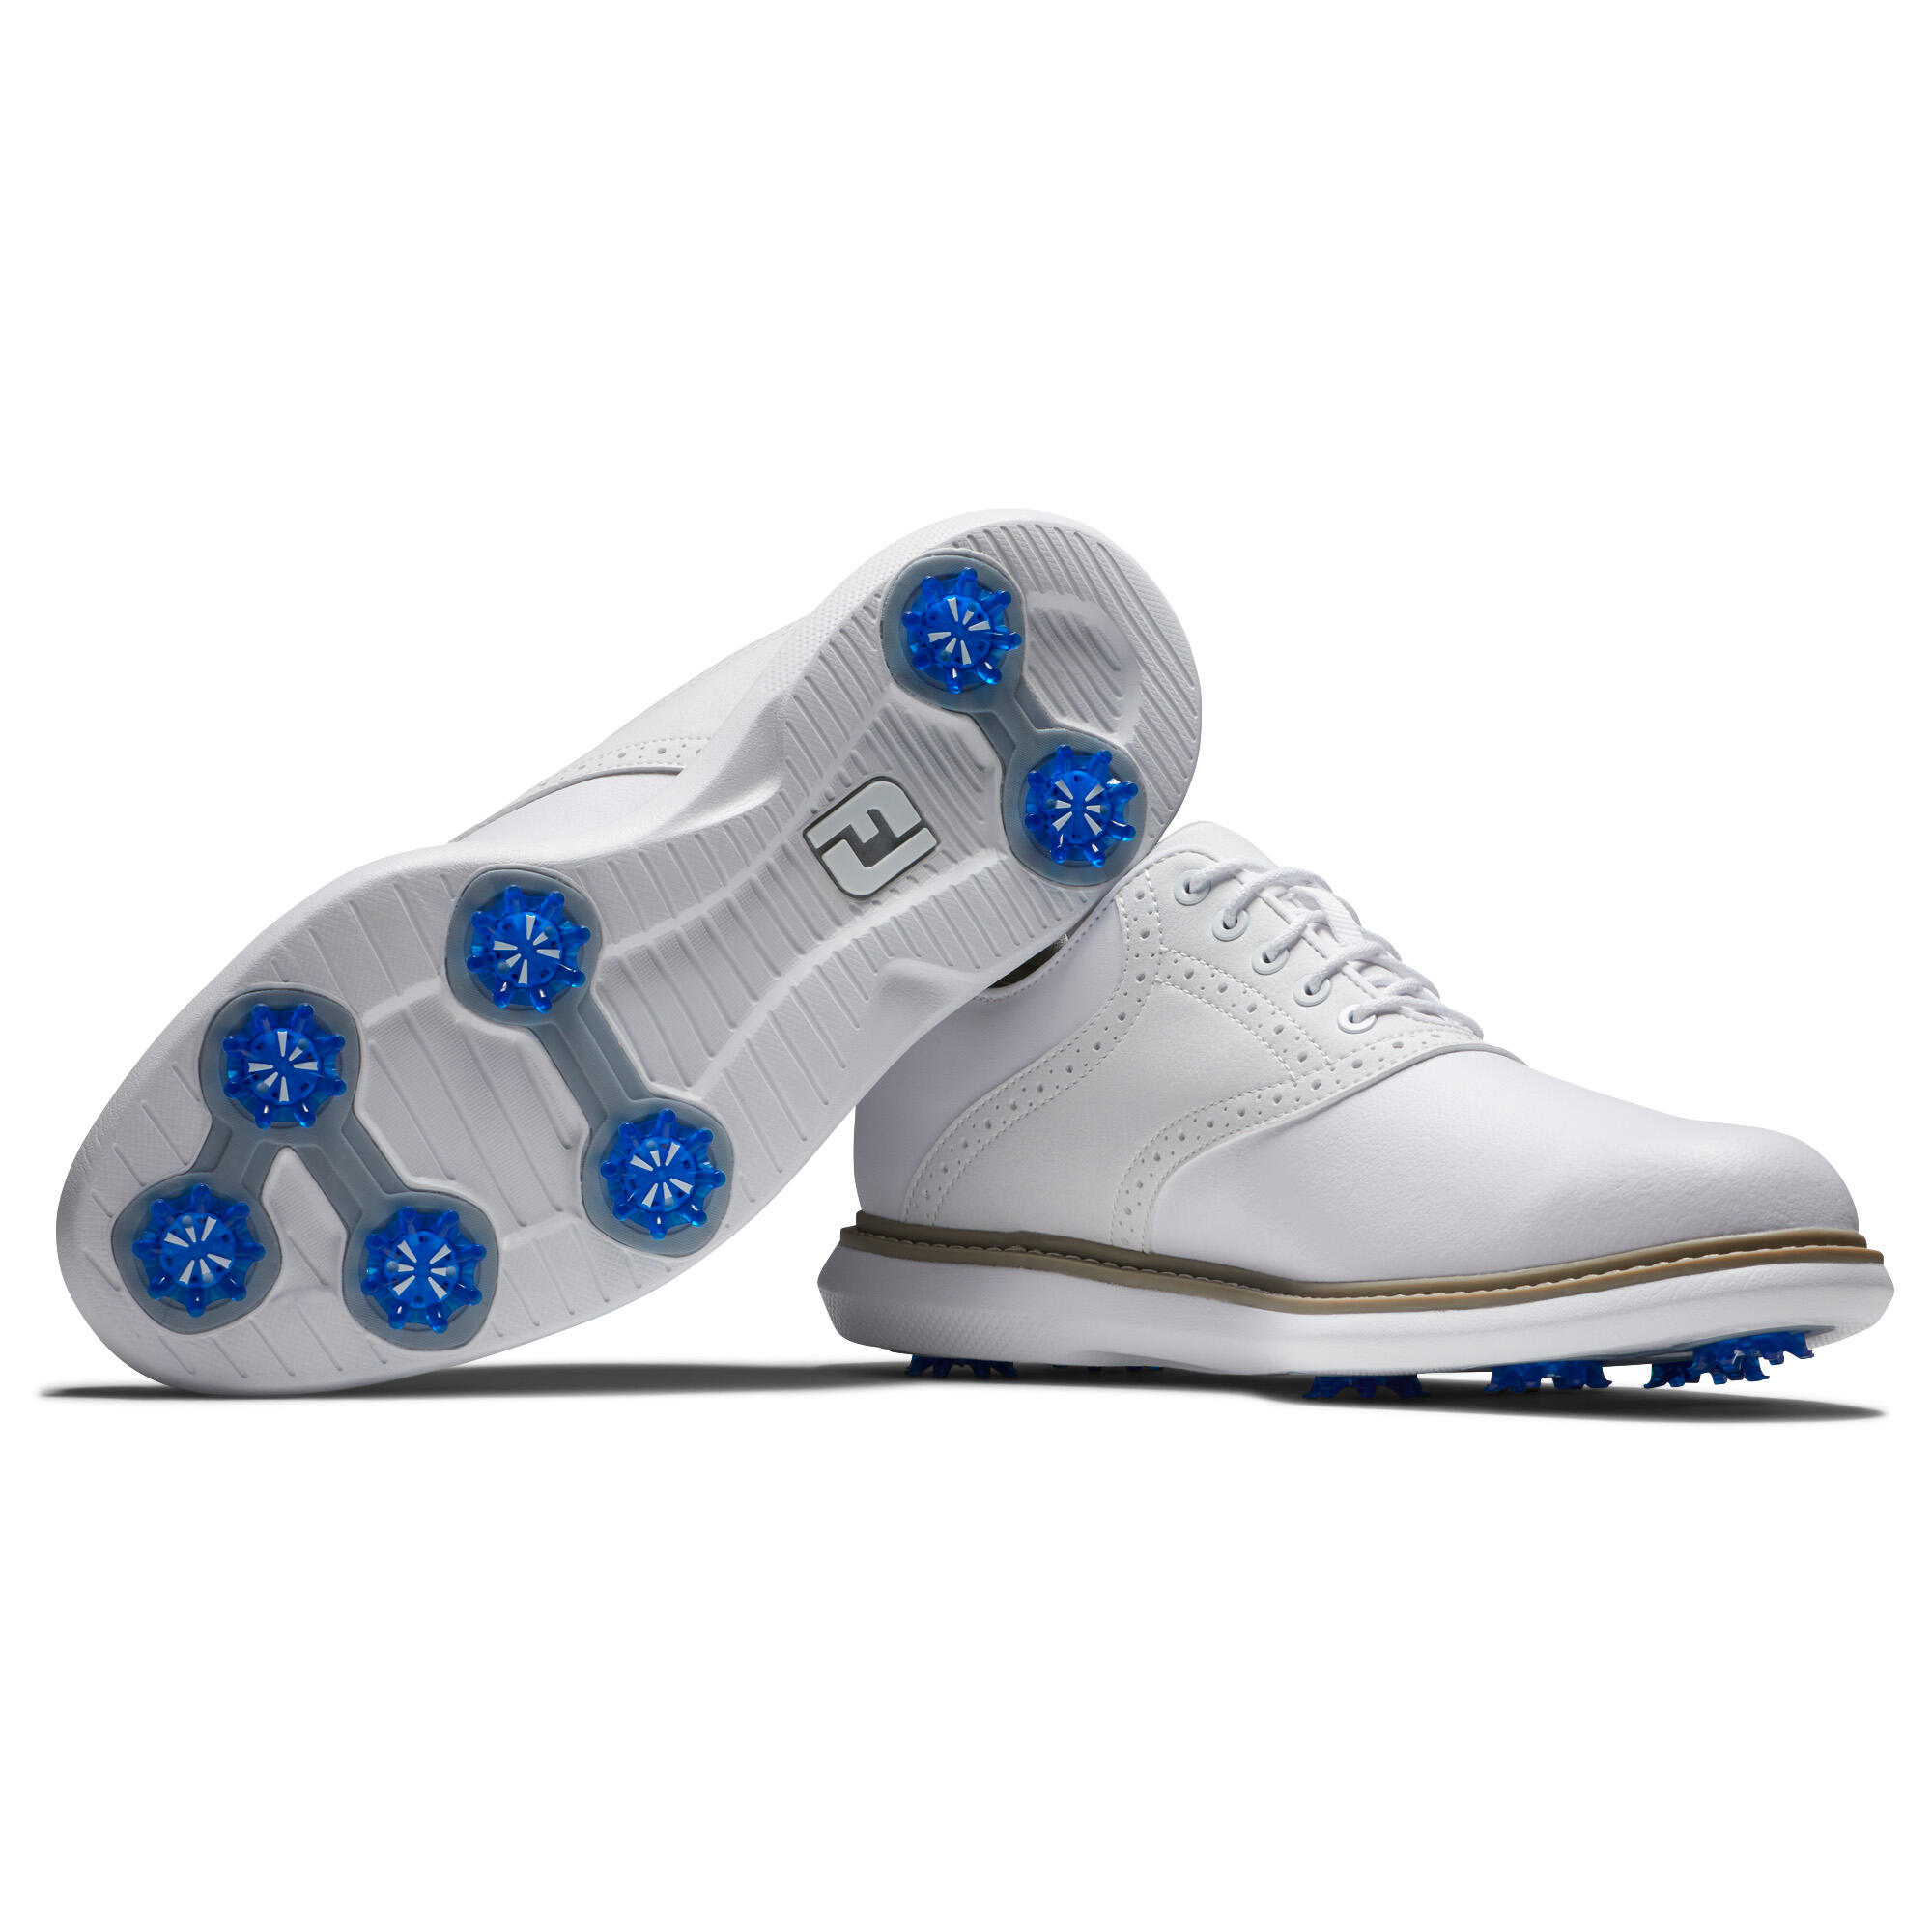 MEN'S GOLF SHOES FOOTJOY WATERPROOF - TRADITIONS WHITE 6/6